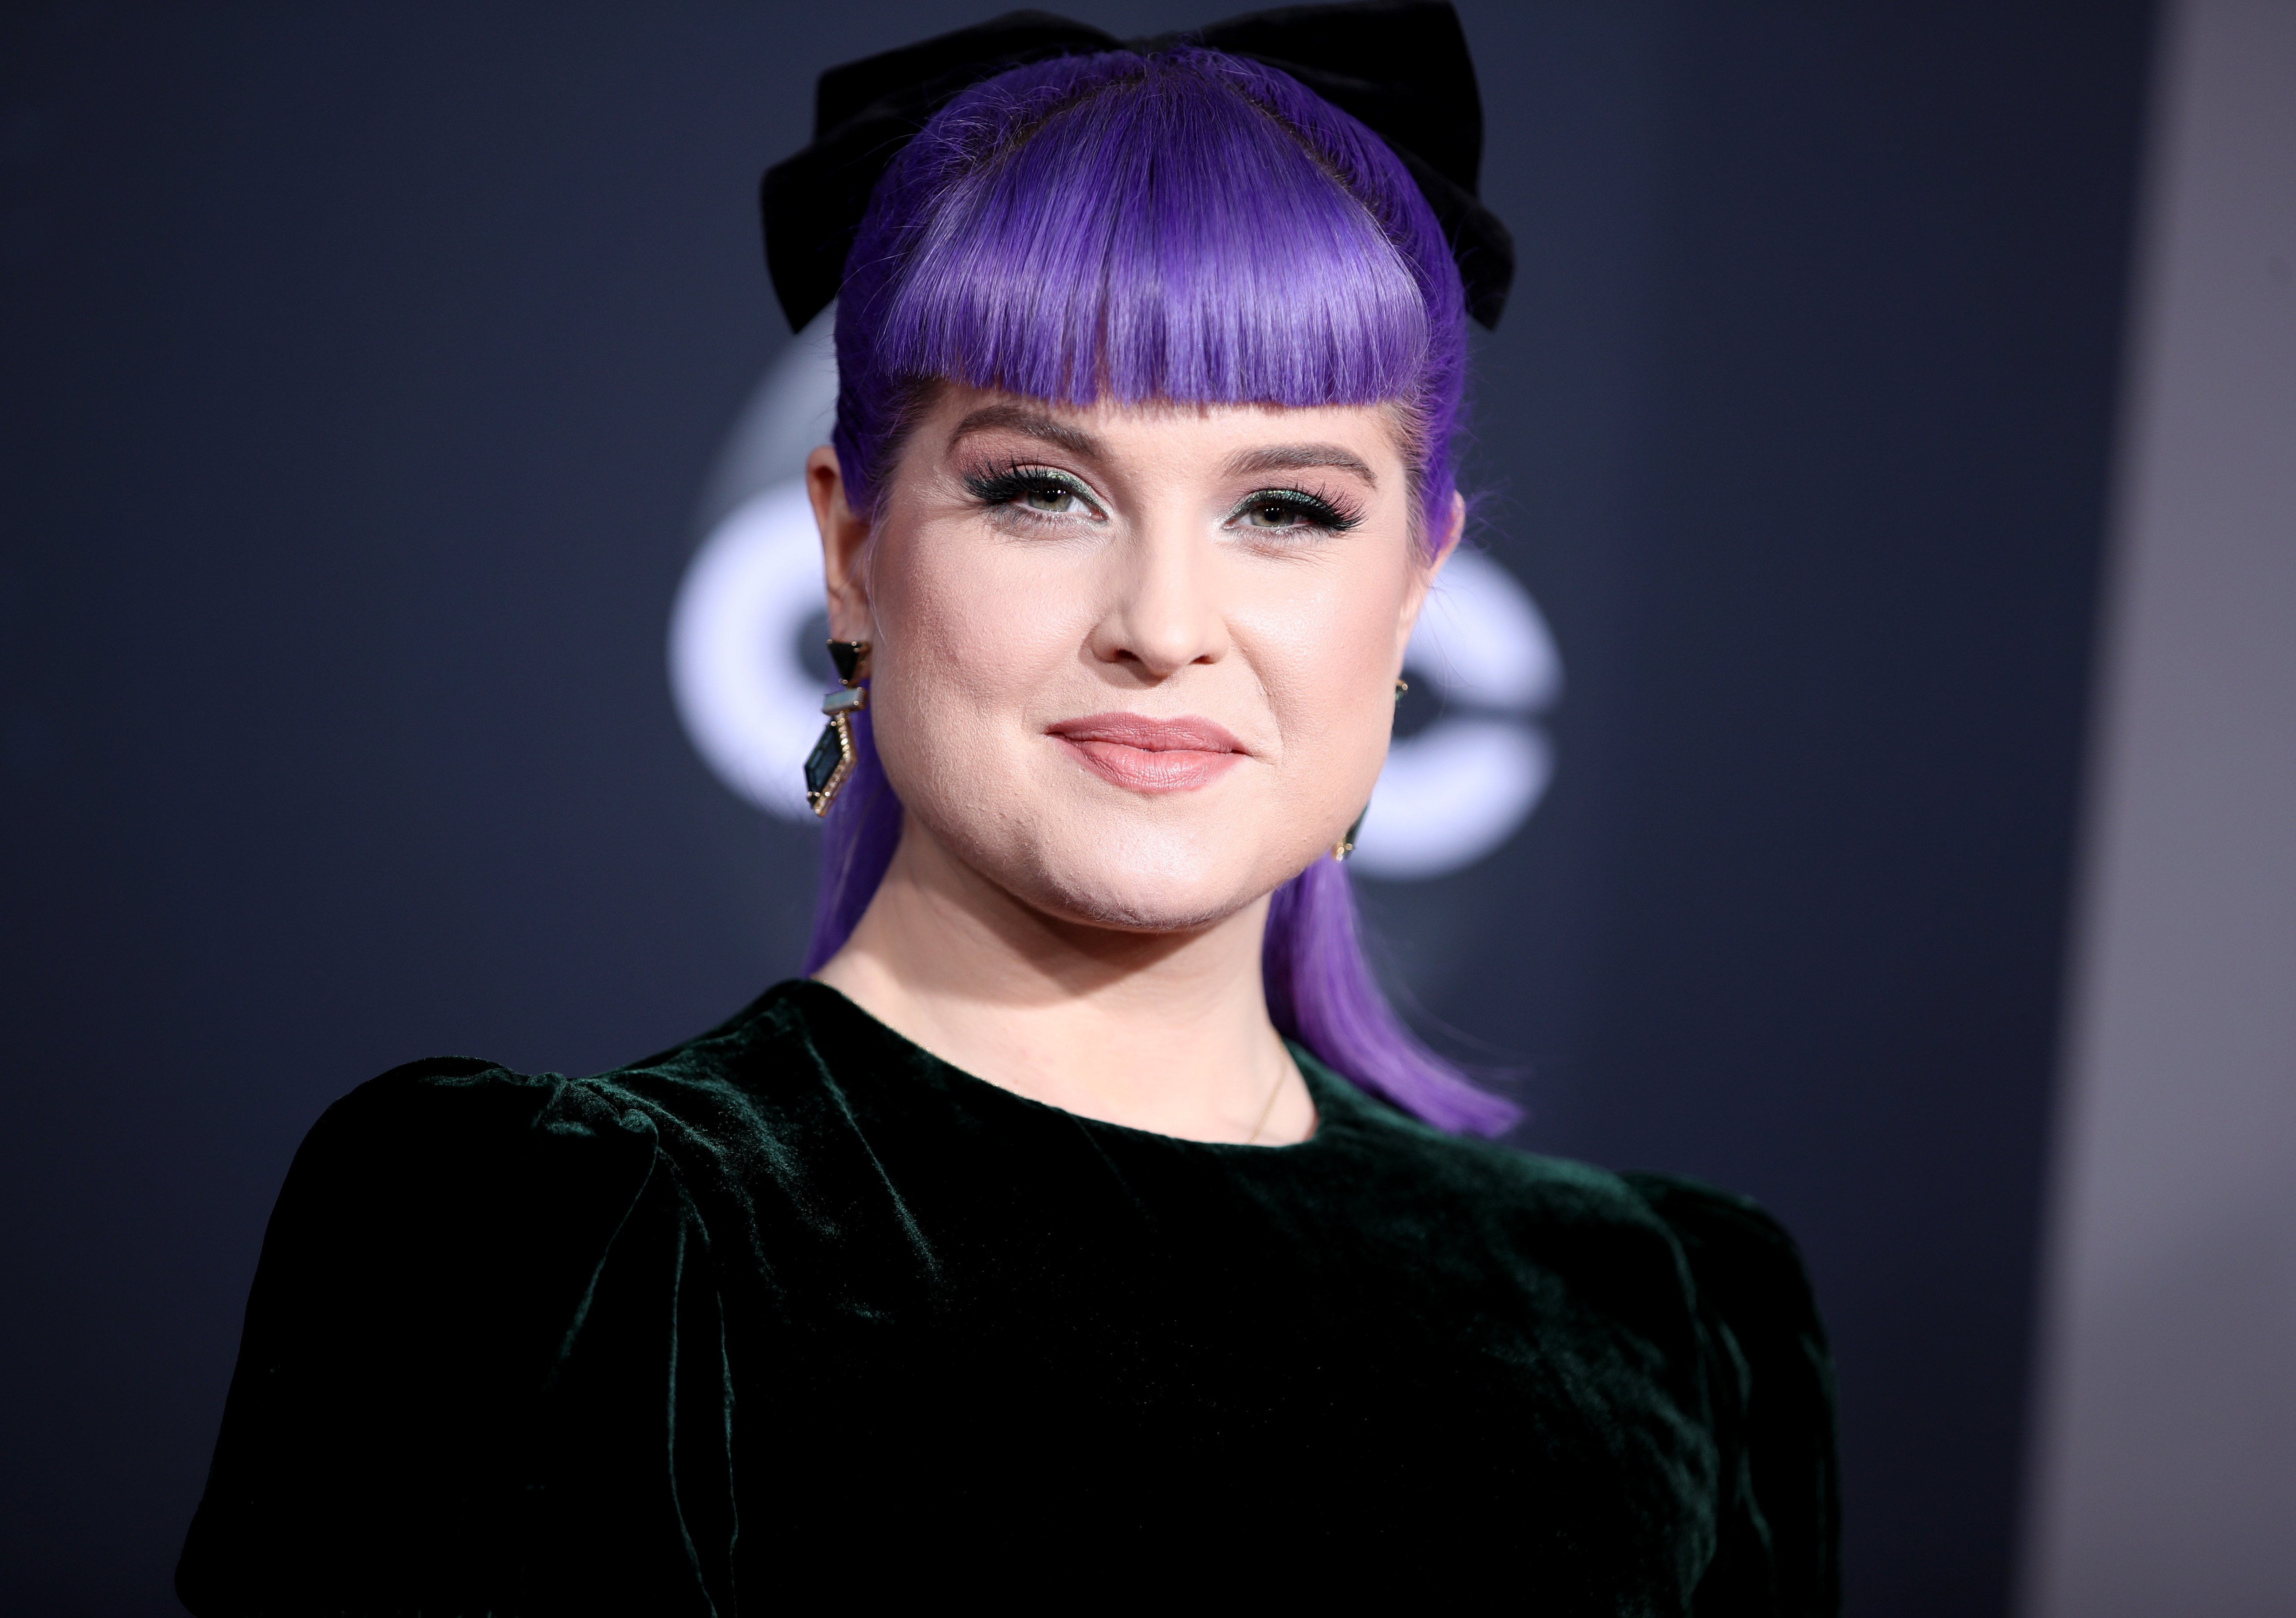 Kelly Osbourne attends the 2019 American Music Awards on November 24, 2019, in Los Angeles, California. | Source: Getty Images.